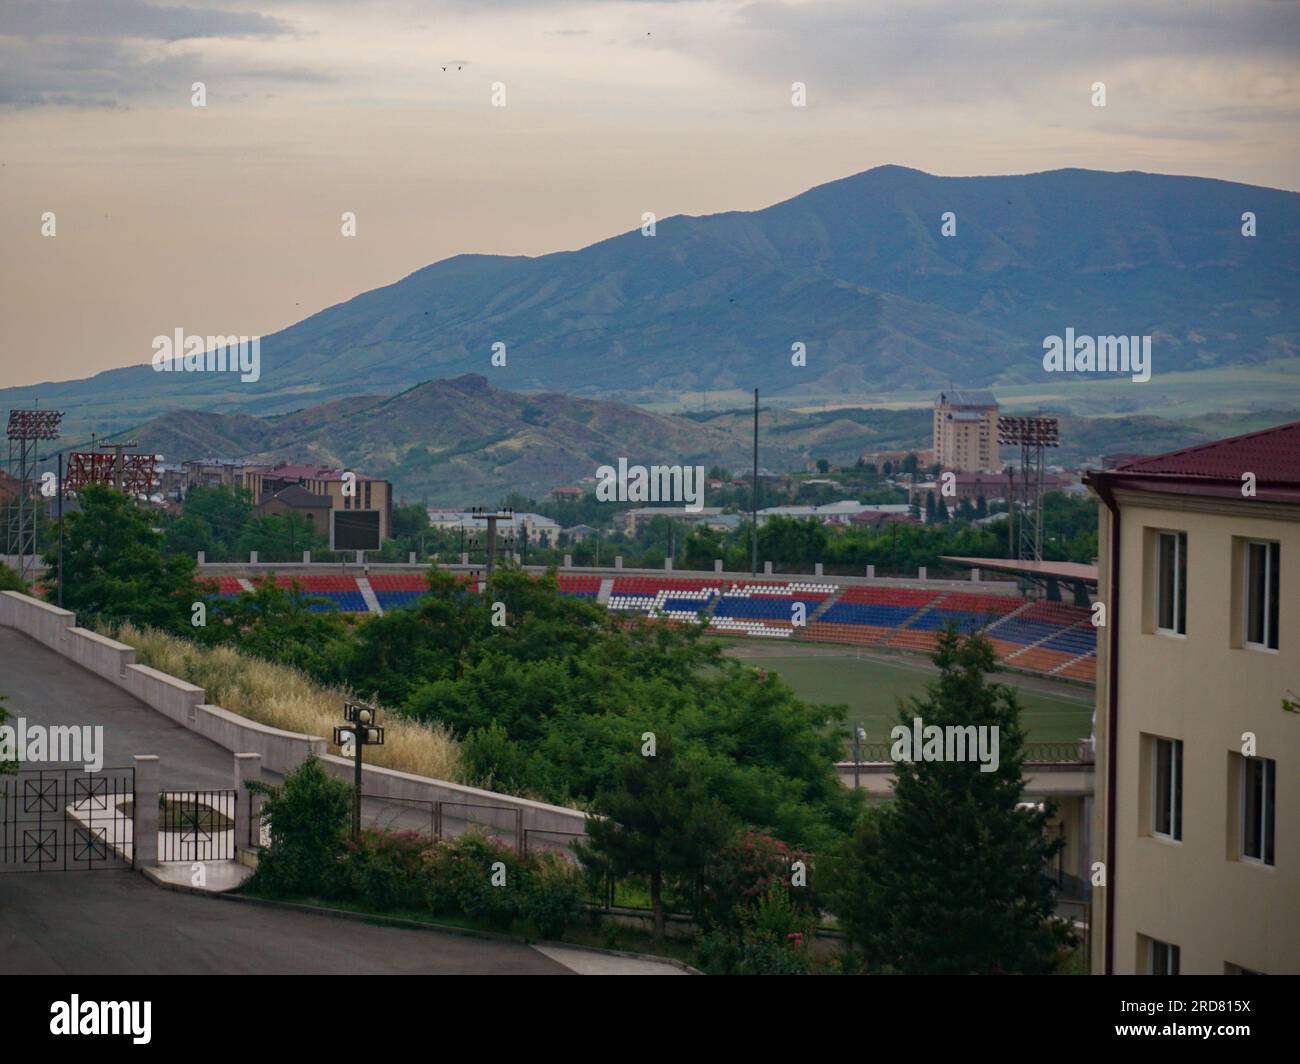 June 11, 2019, Stepanakert, Azerbaijan: General view of Stepanakert Republican Stadium where the 2019 European Football Championship under ConIFA was hosted in Stepanakert, Nagorno-Karabakh. The unrecognised yet de facto independent country in South Caucasus, Nagorno-Karabakh (also known as Artsakh) has been in the longest-running territorial dispute between Azerbaijan and Armenia in post-Soviet Eurasia since the collapse of Soviet Union. It is mainly populated by ethnic Armenians. (Credit Image: © Jasmine Leung/SOPA Images via ZUMA Press Wire) EDITORIAL USAGE ONLY! Not for Commercial USAGE! Stock Photo